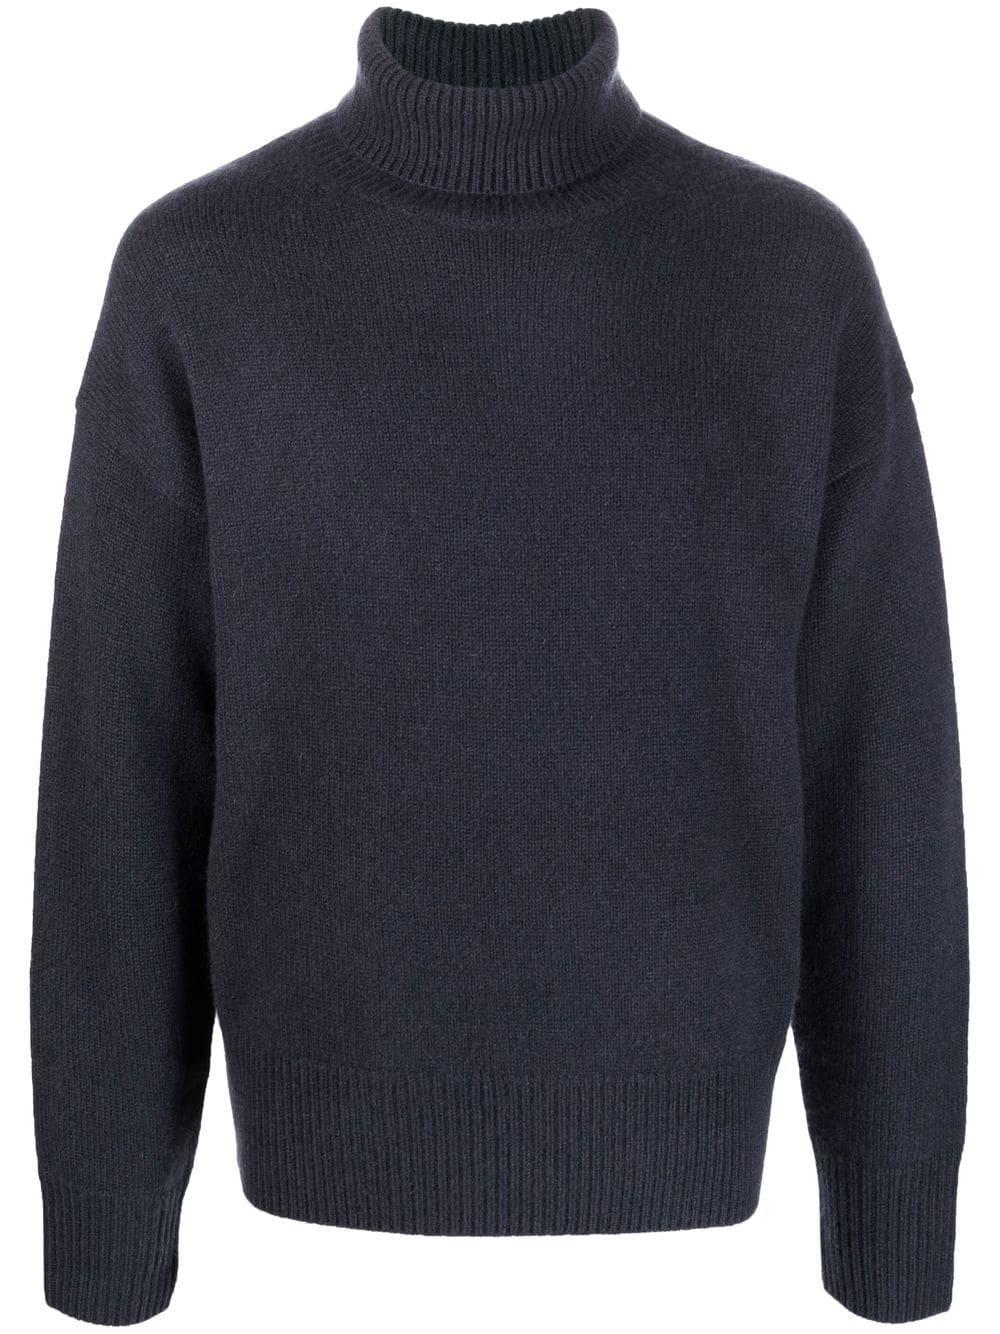 arch4 Cashmere World's End Rollback Jumper in Grey (Grey) for Men ...